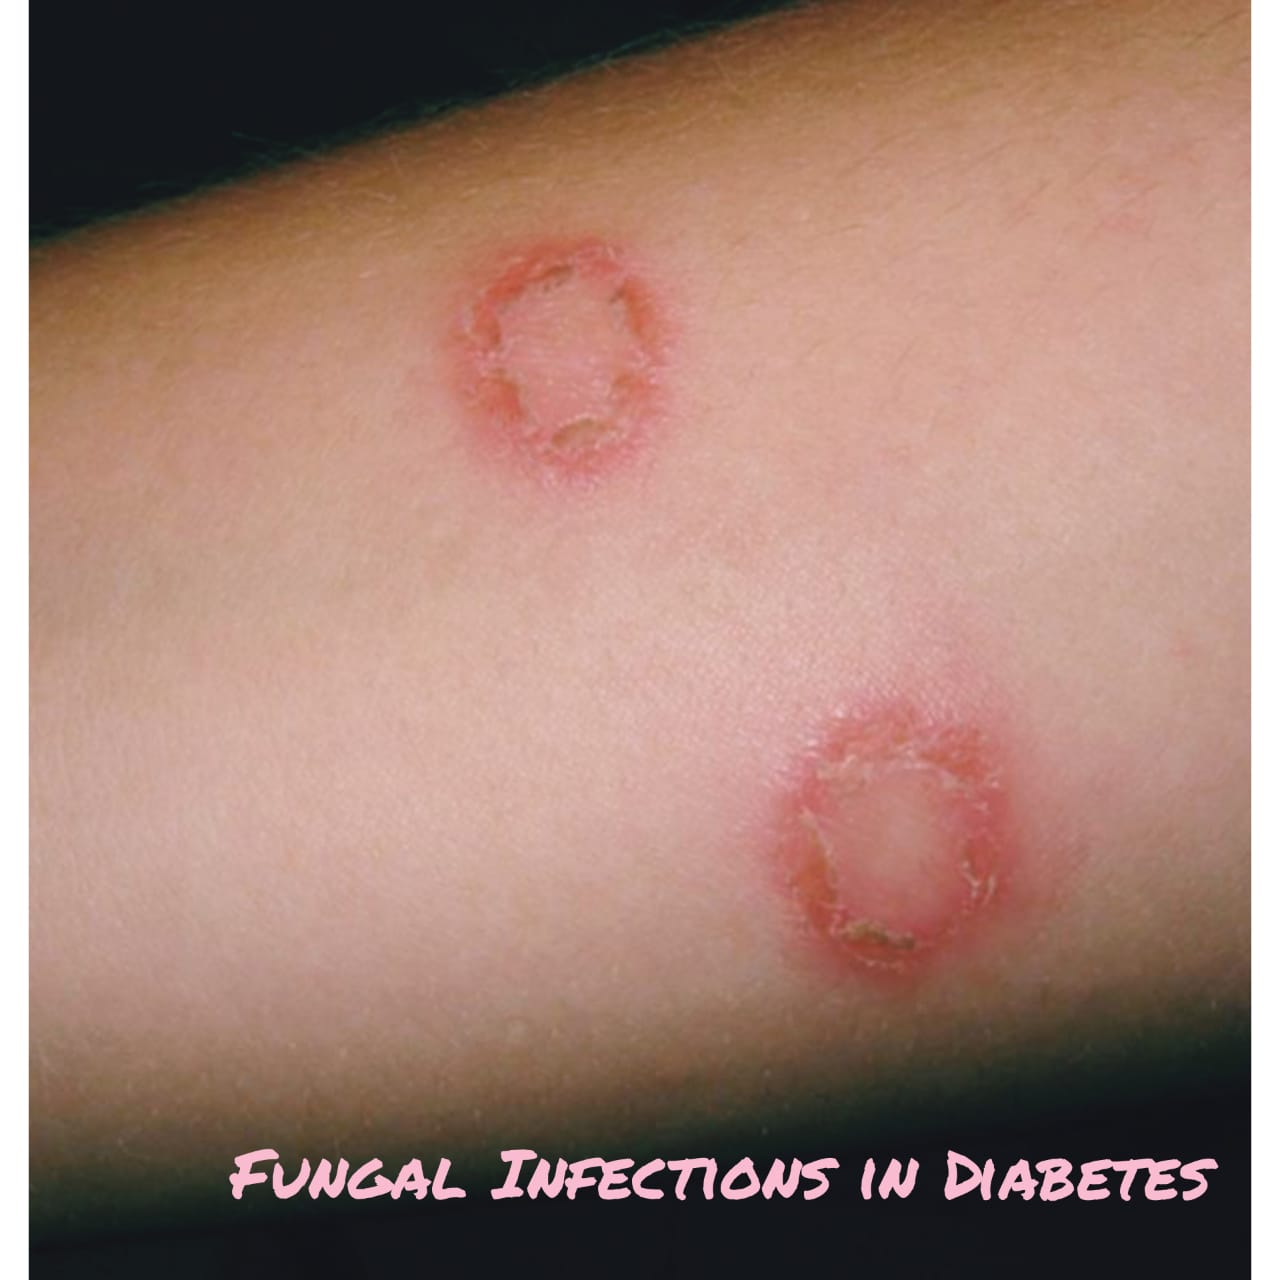 Fungal Infections - Dr Ben Medical - Men's Health Singapore GP Clinic